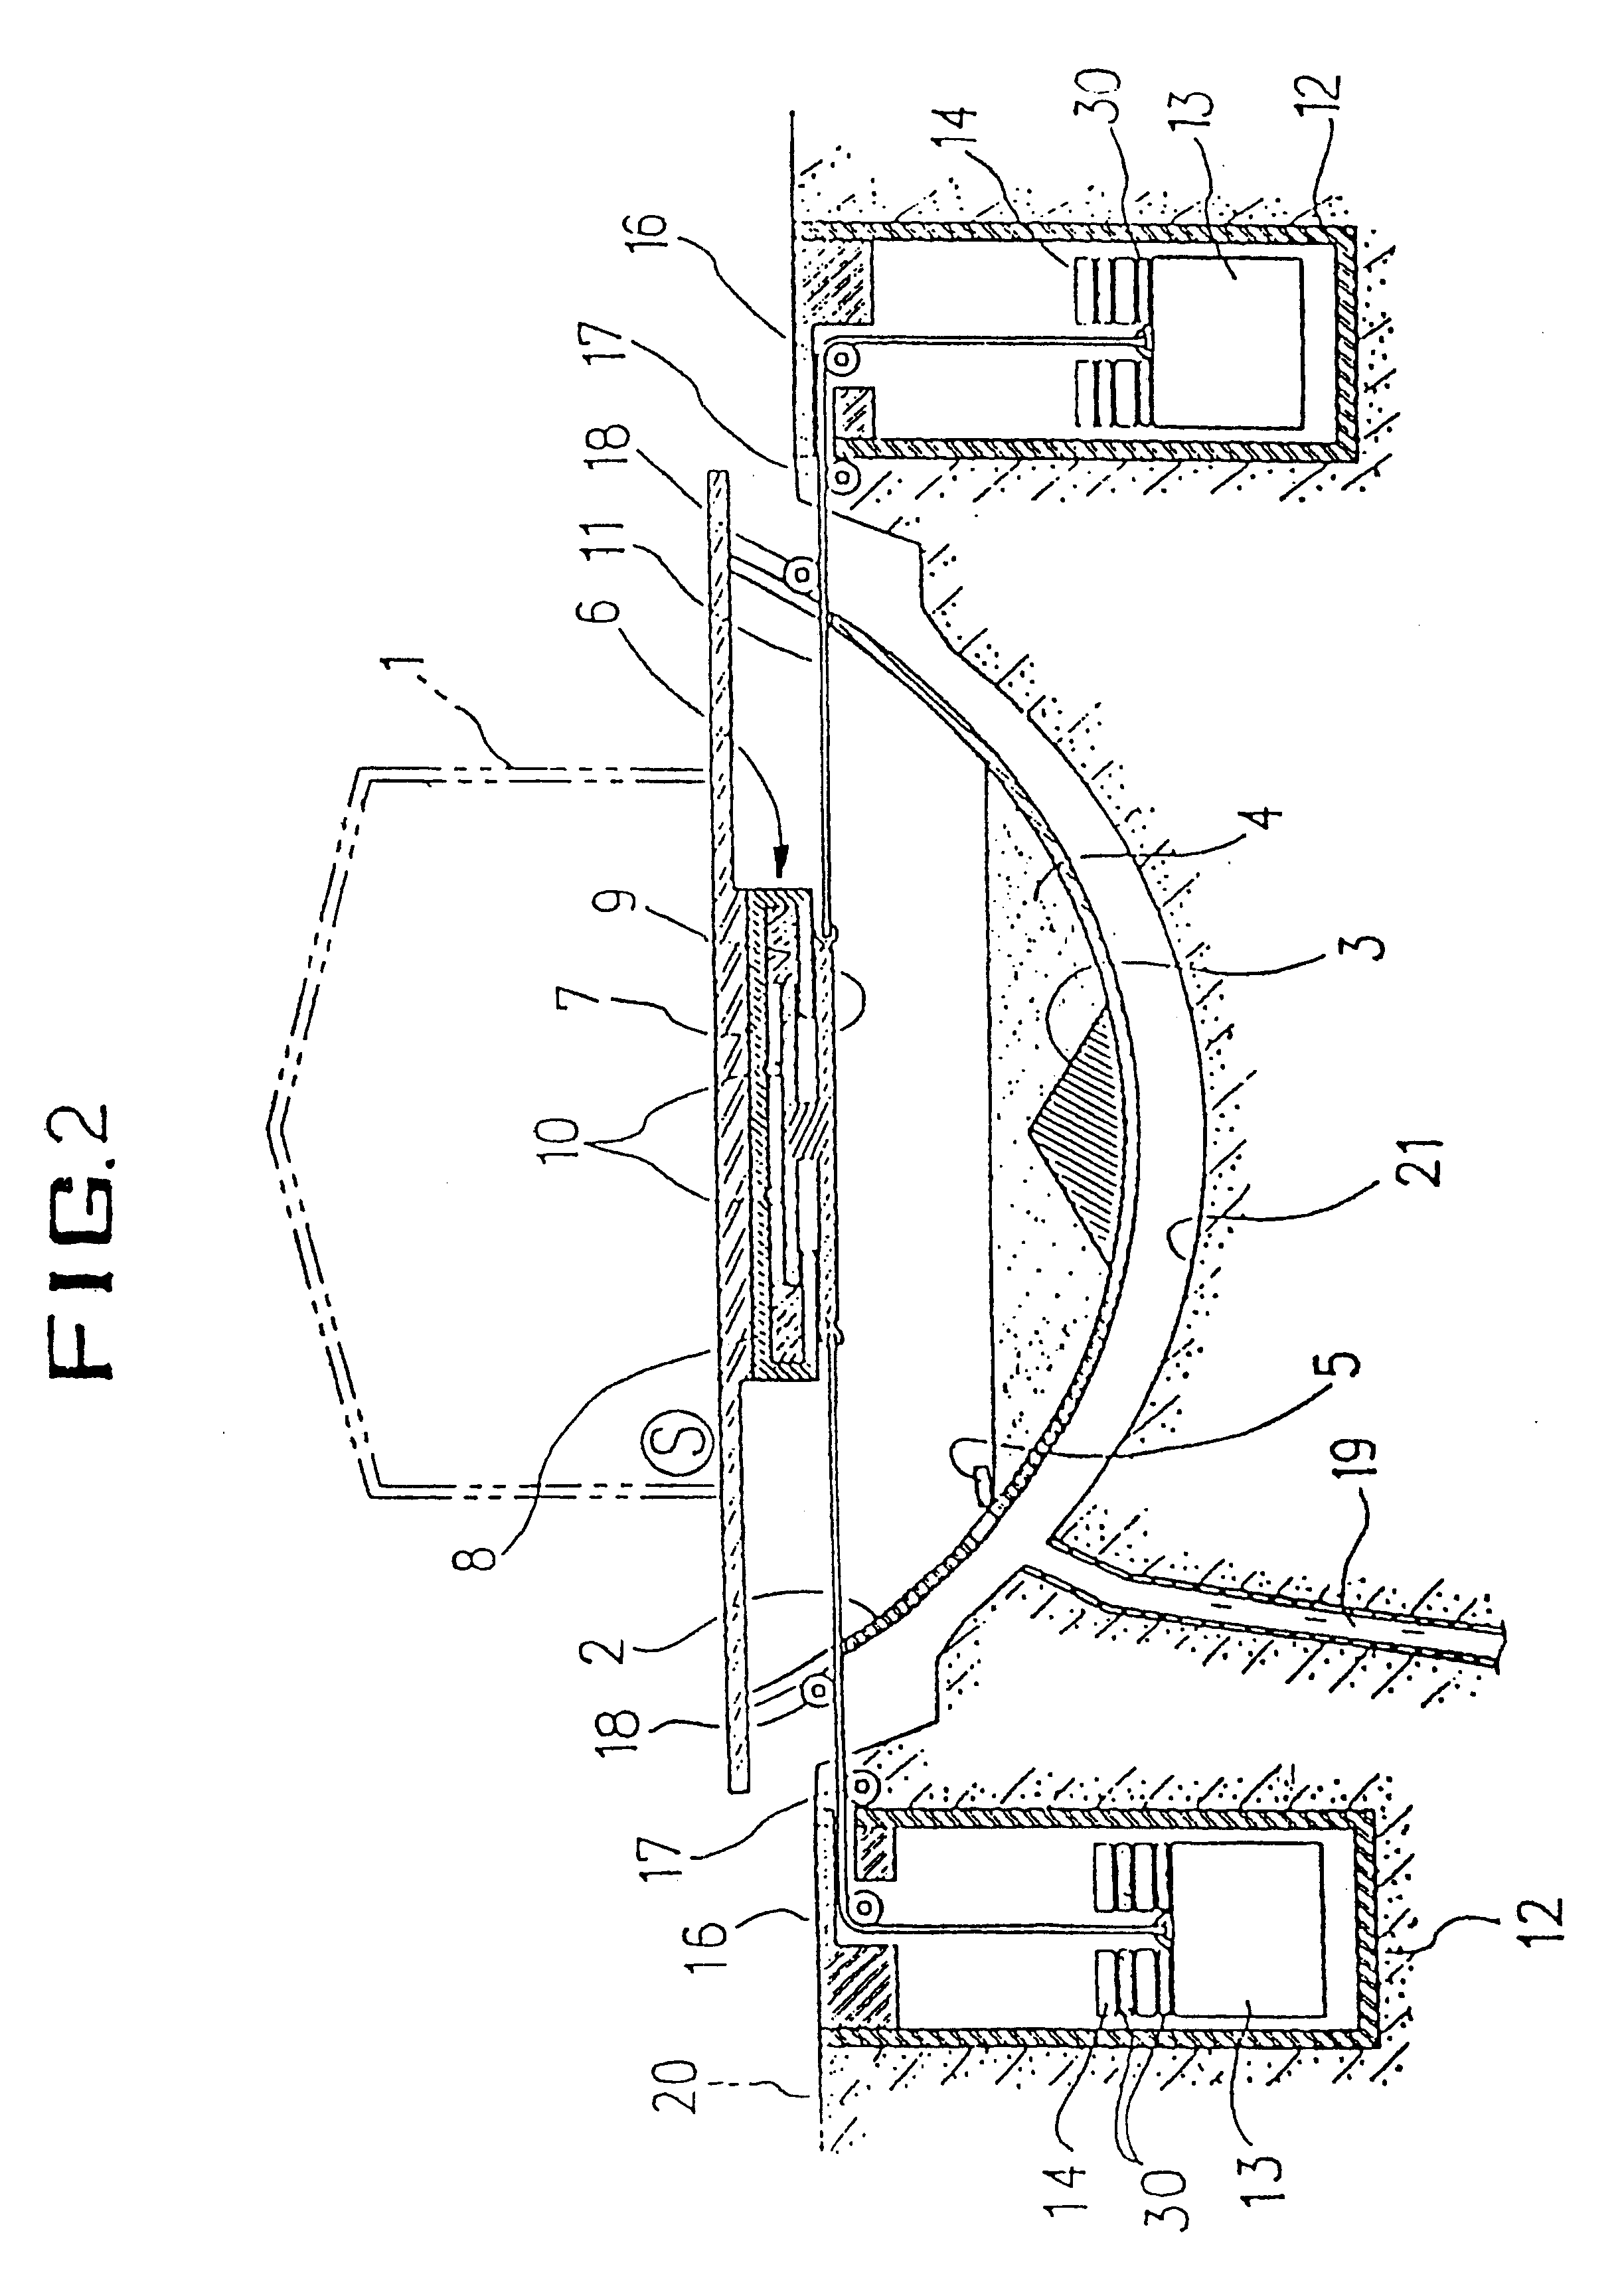 Method of and apparatus for preventing structure from collapsing due to earthquake